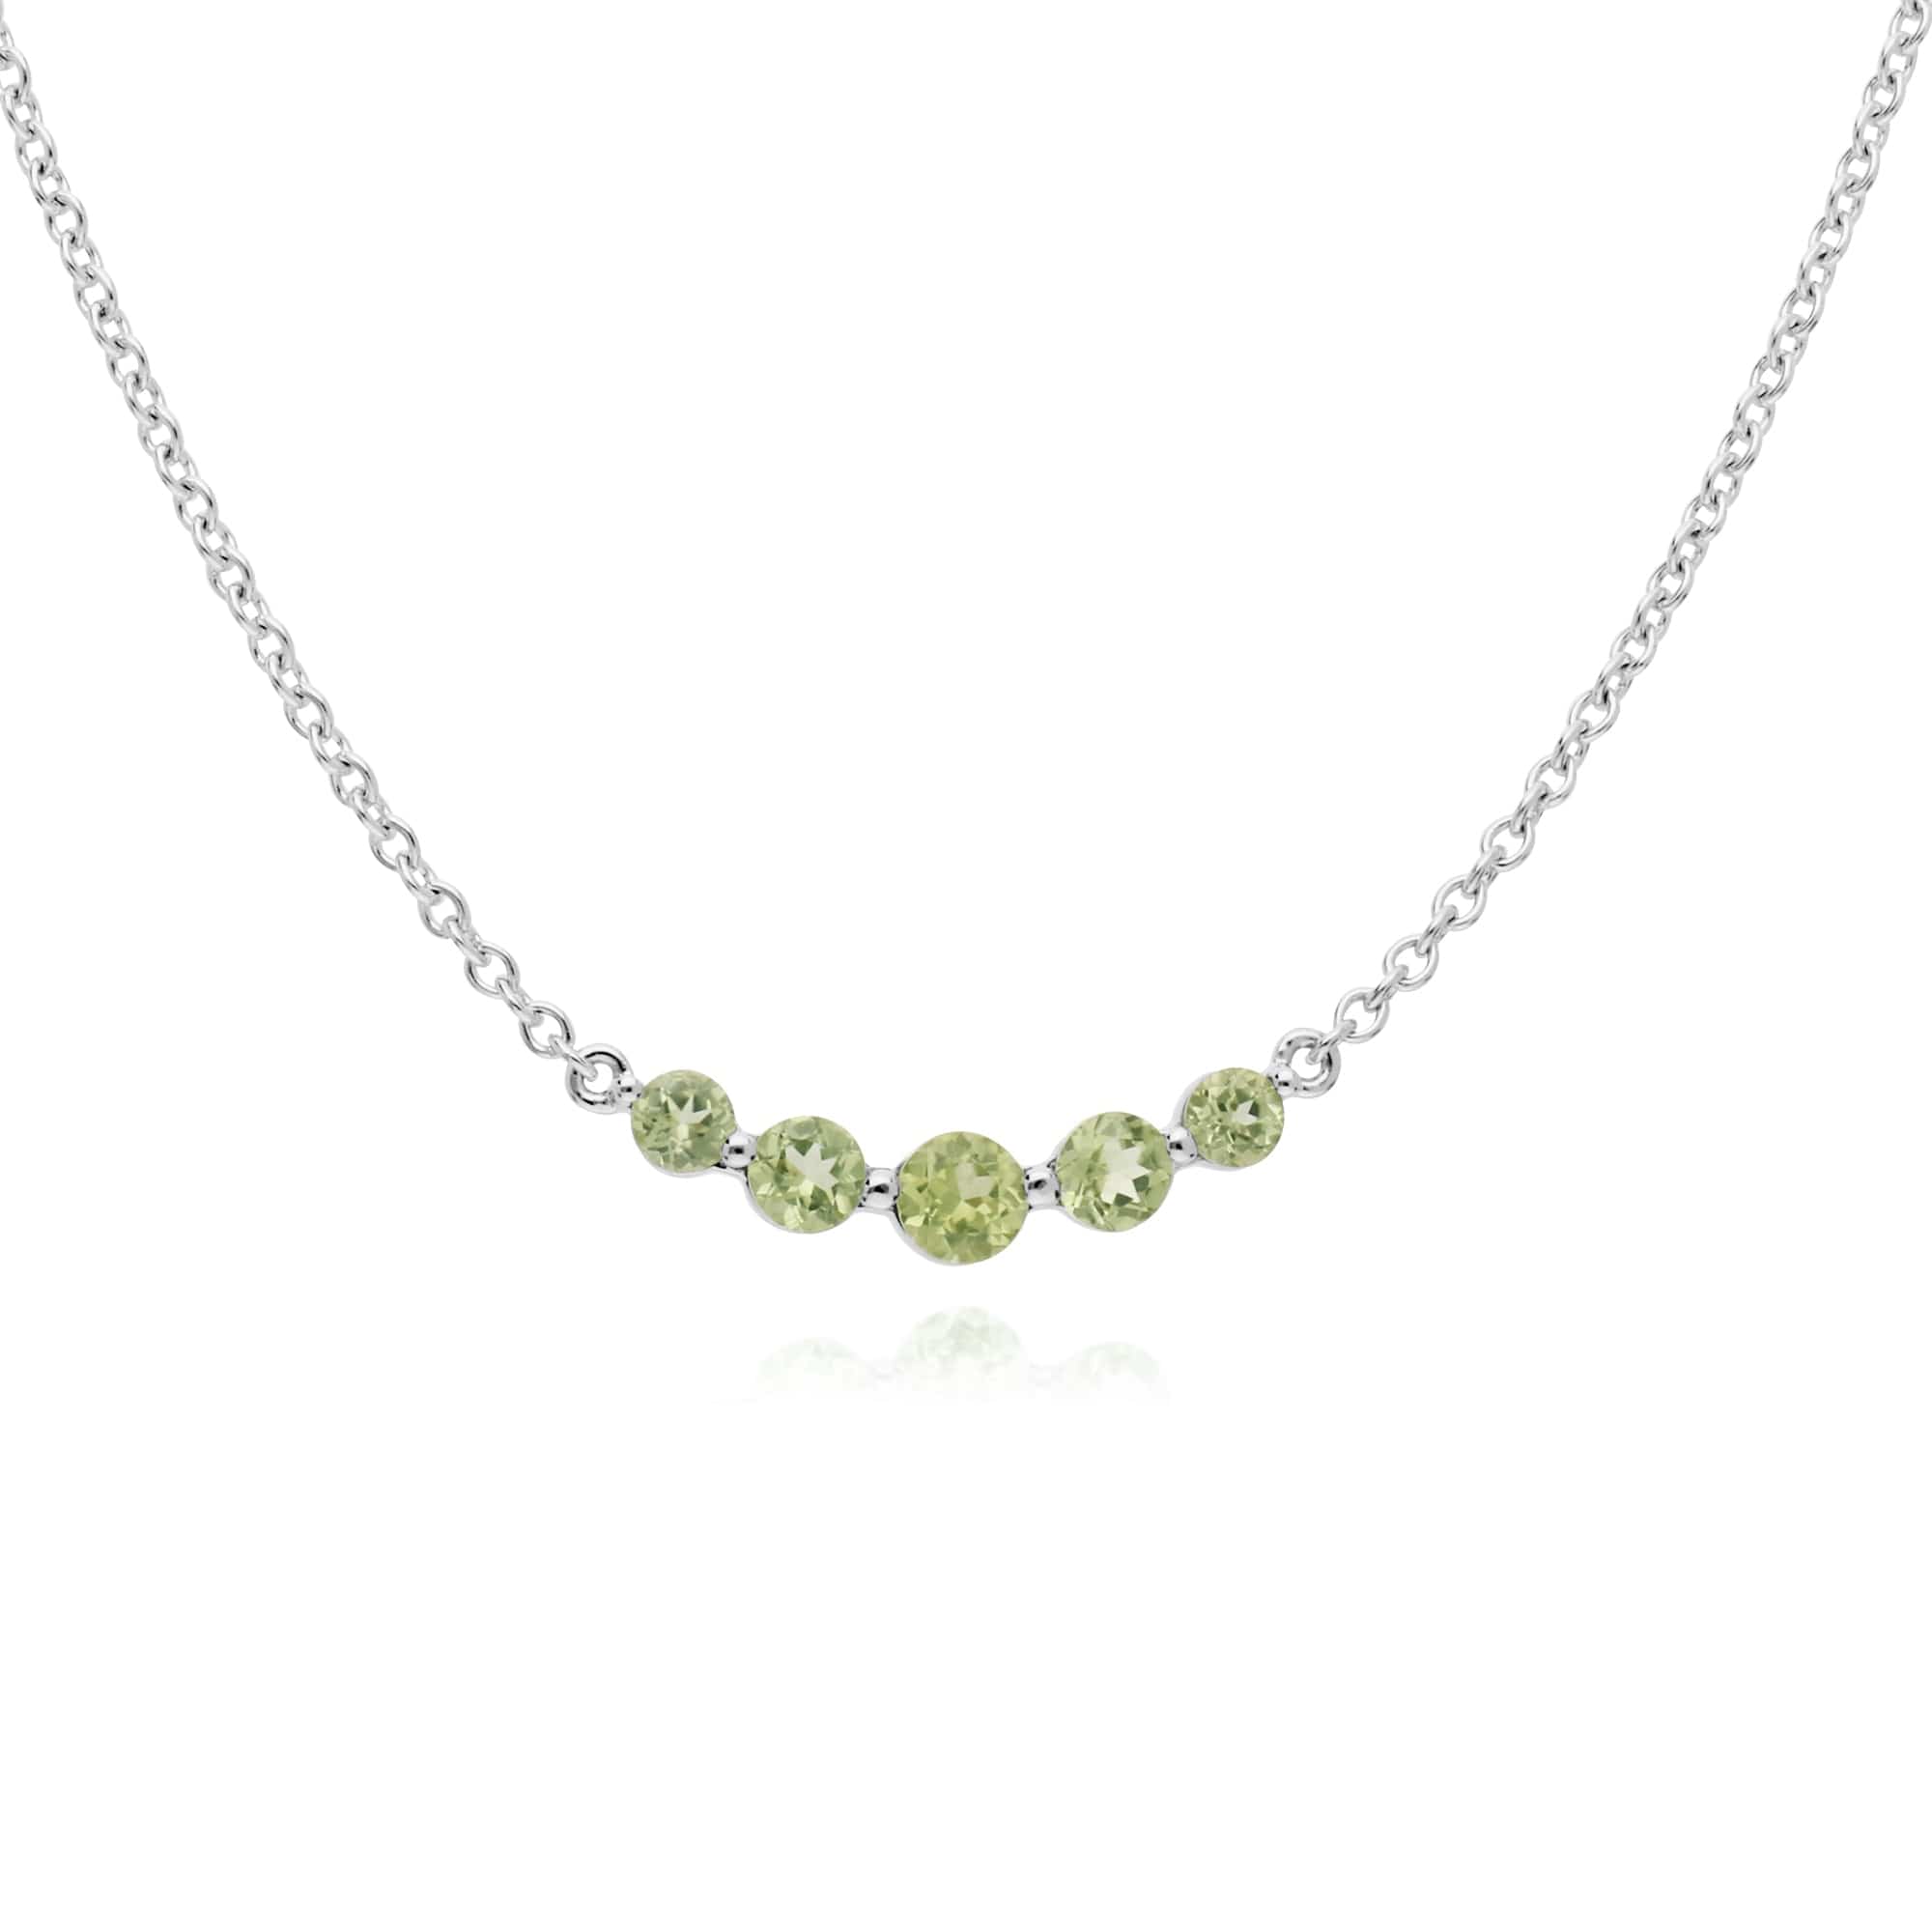 270N034104925 Classic Round Peridot 5 Stone Gradient Necklace in 925 Sterling Silver 1